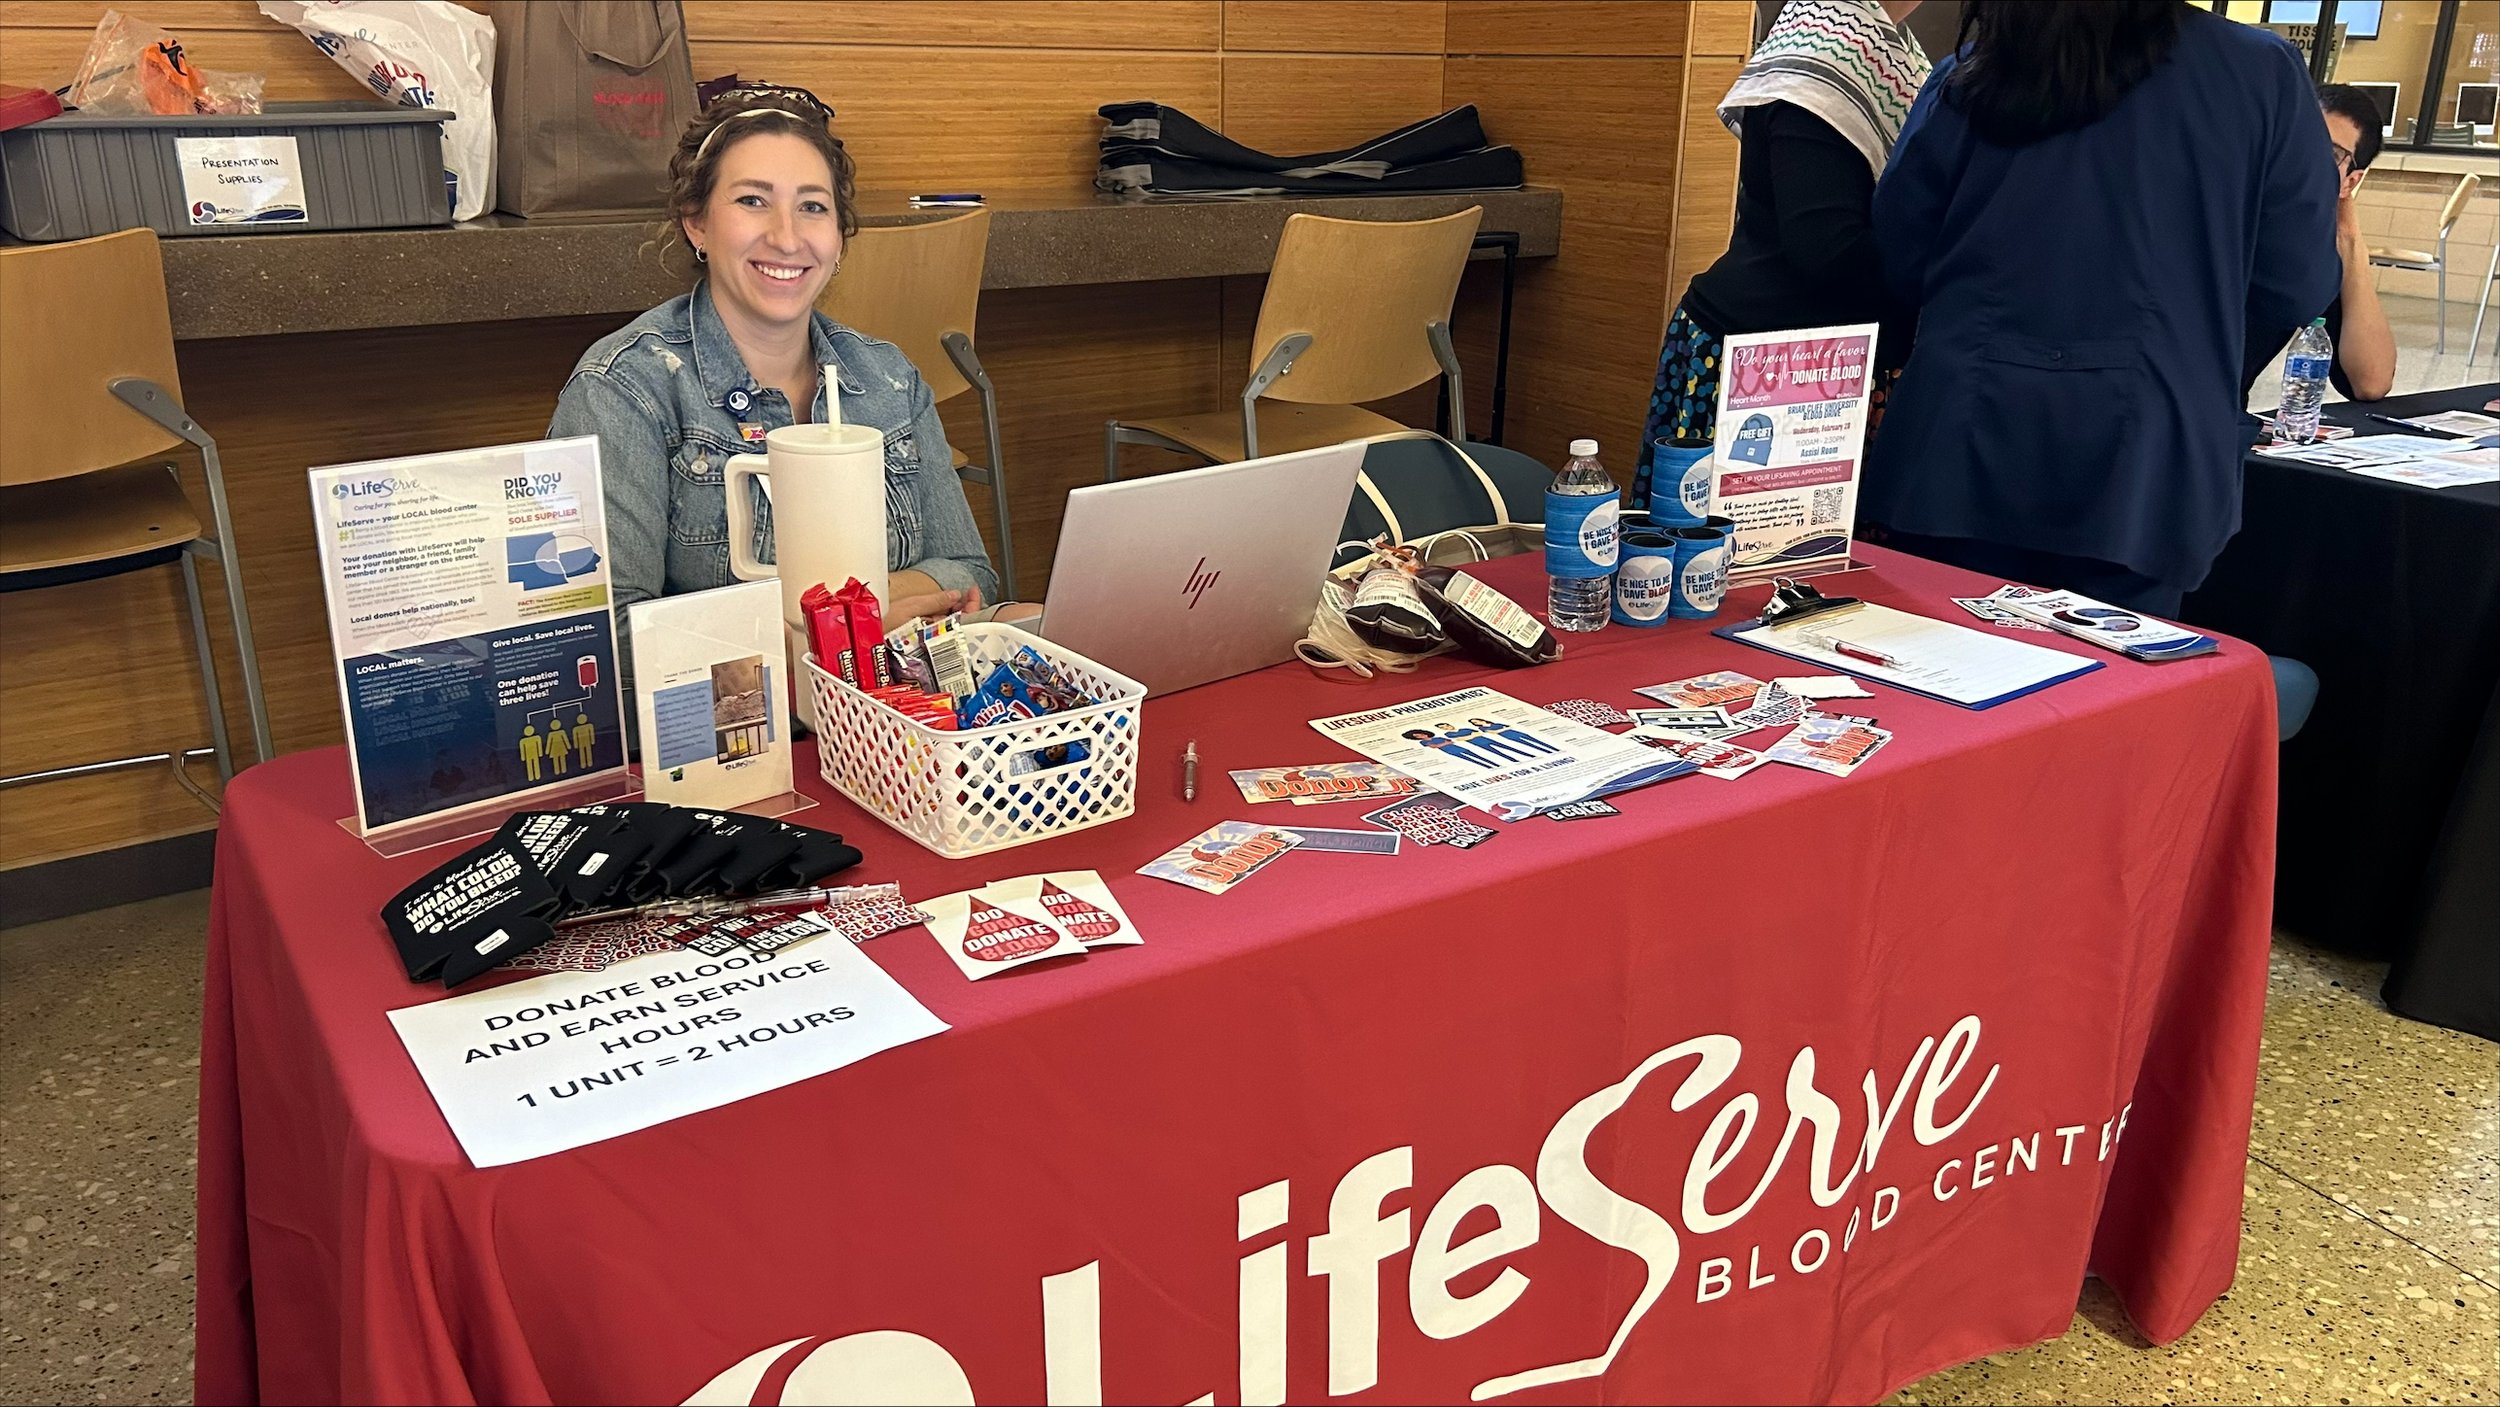  The Lifeserve Blood Center was at the event, Briar Cliff hosts blood drives through Lifeserve once a semester and is looking for more volunteers! Allison Brumels ran the booth and informed people about the benefits of donating blood.&nbsp; 